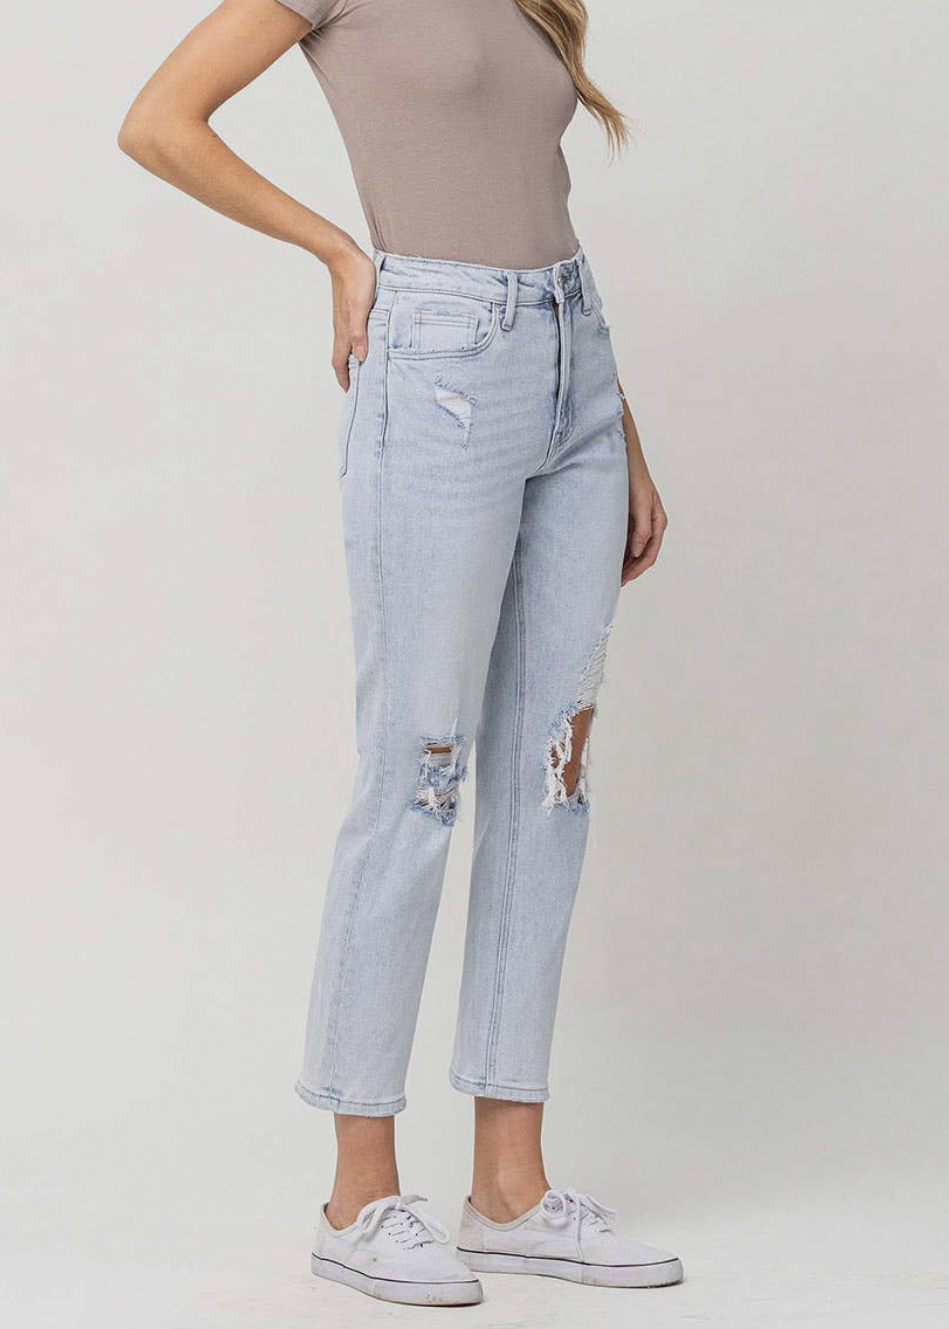 the mom jeans you NEED! – One Woman, One Goal